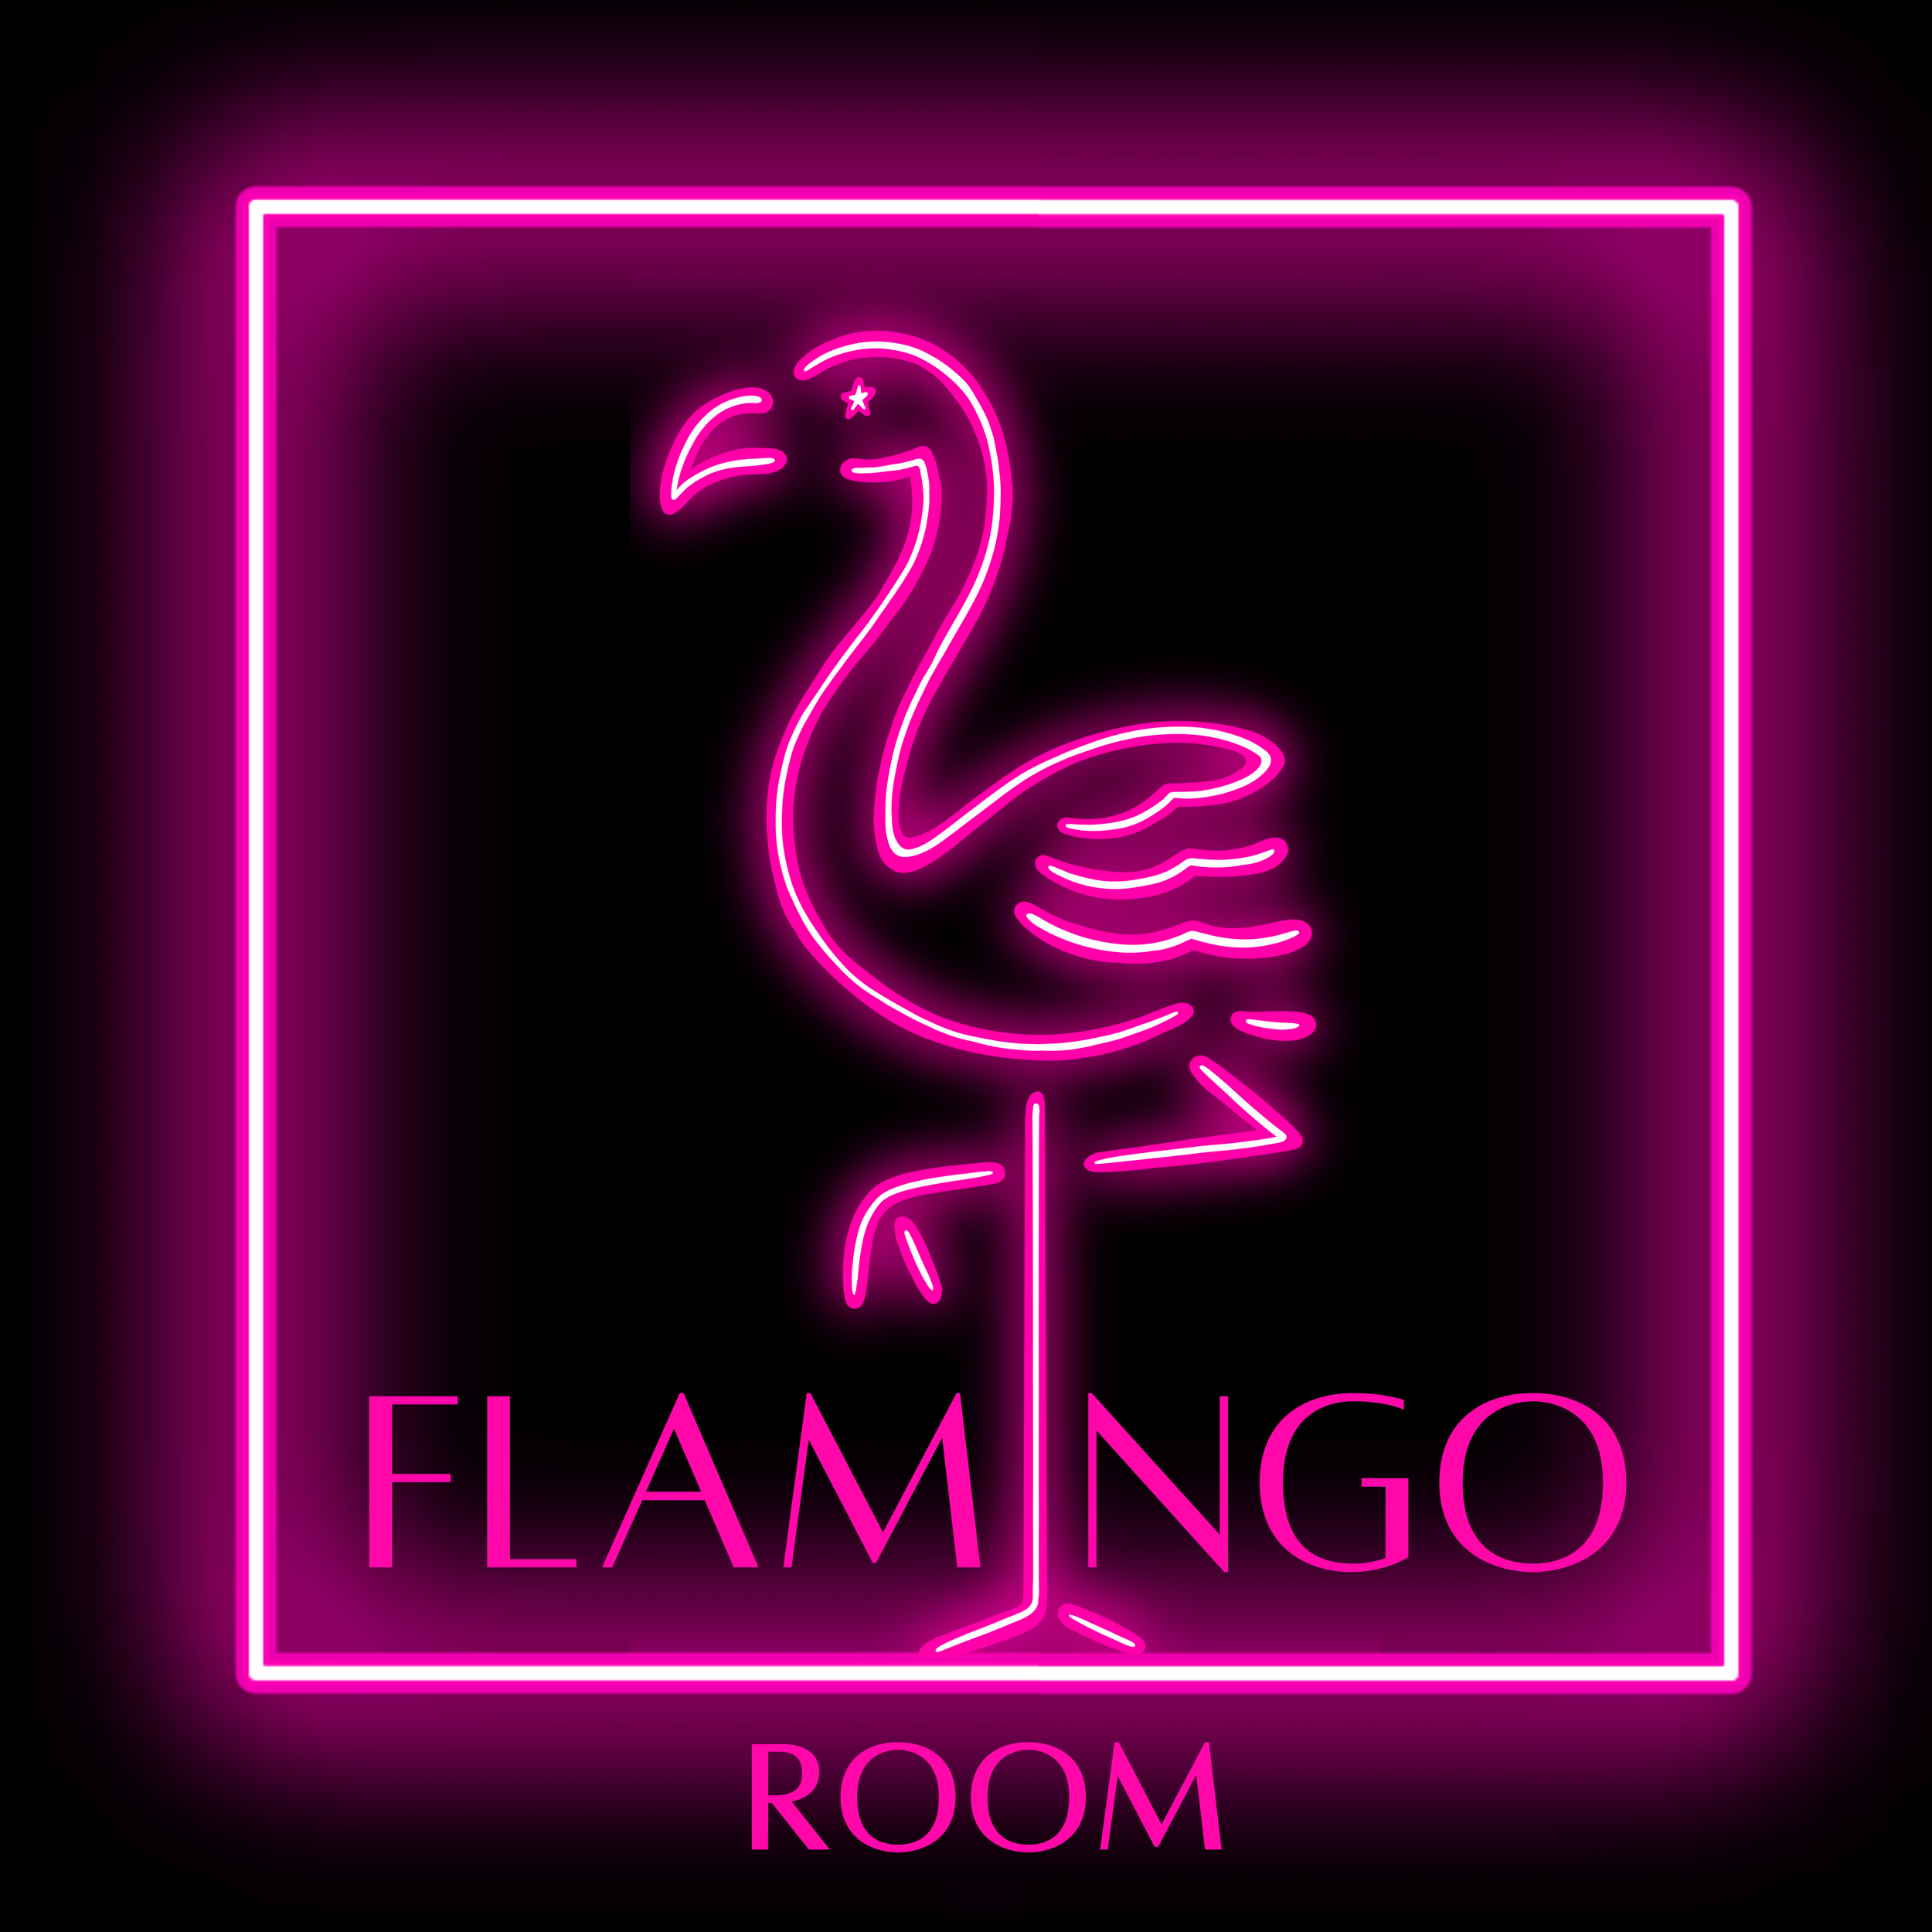 FlamingoRoomwhite copy 2.PNG